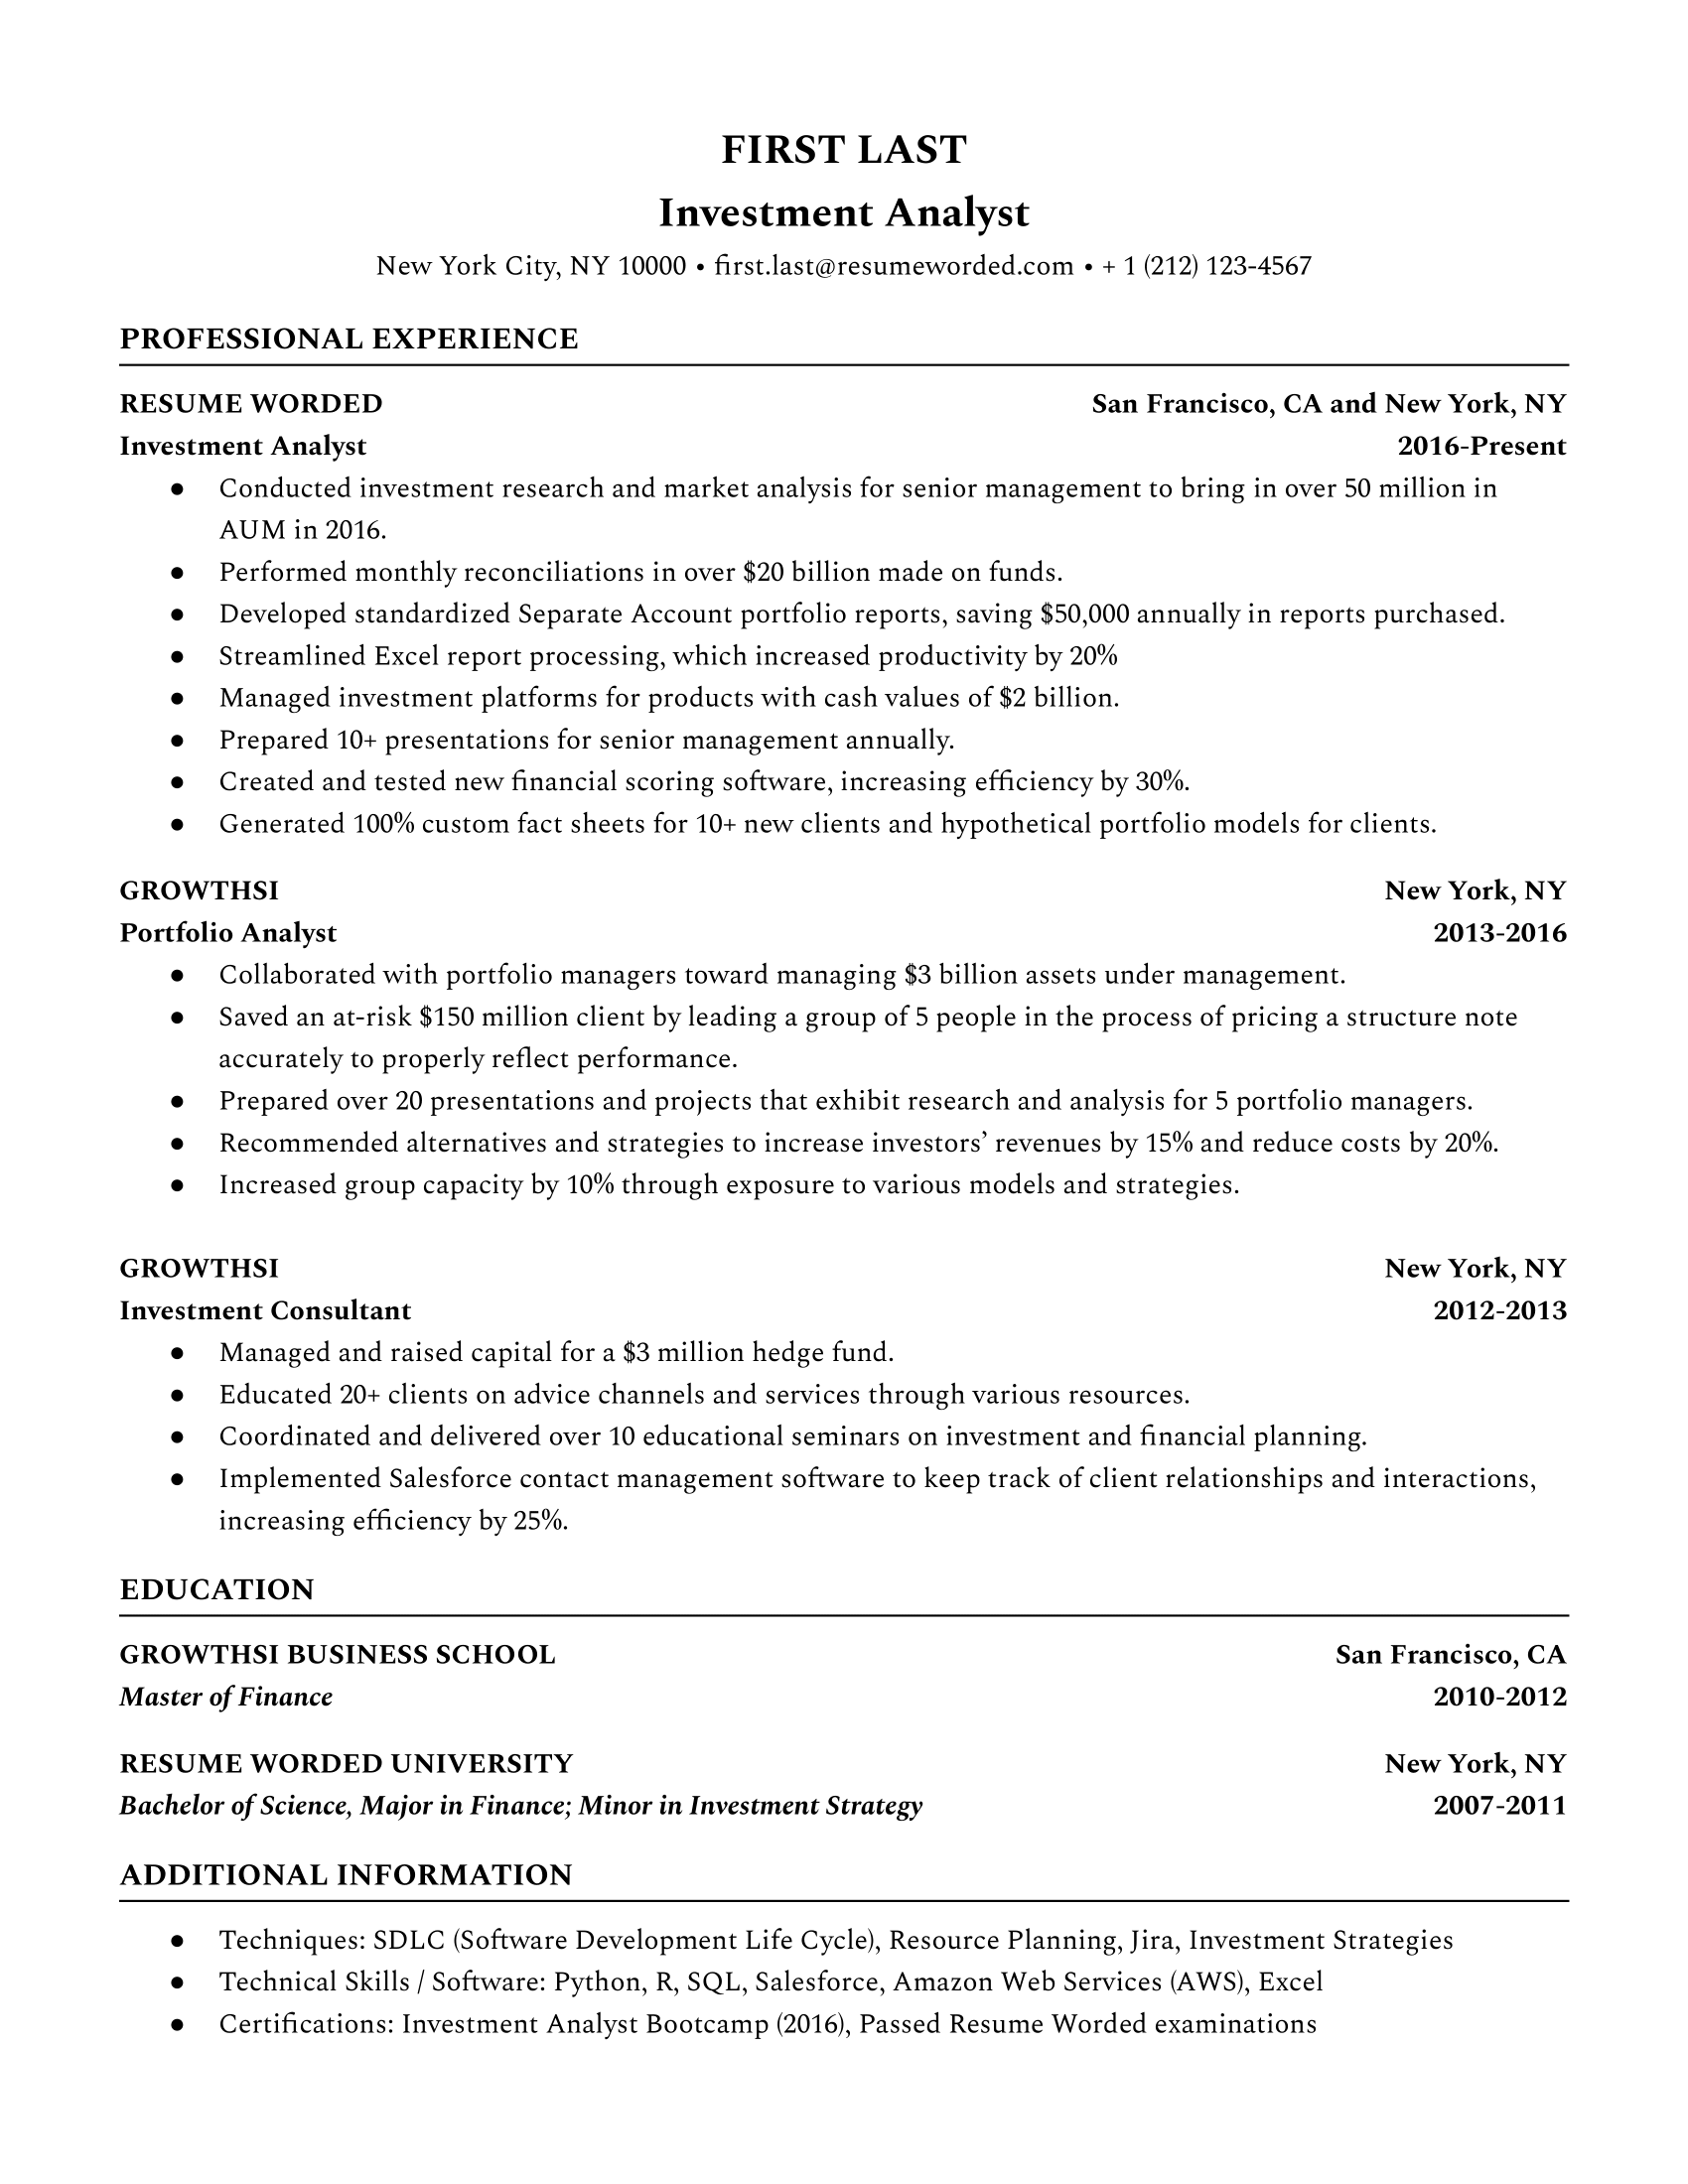 Investment Analyst Resume Template + Example